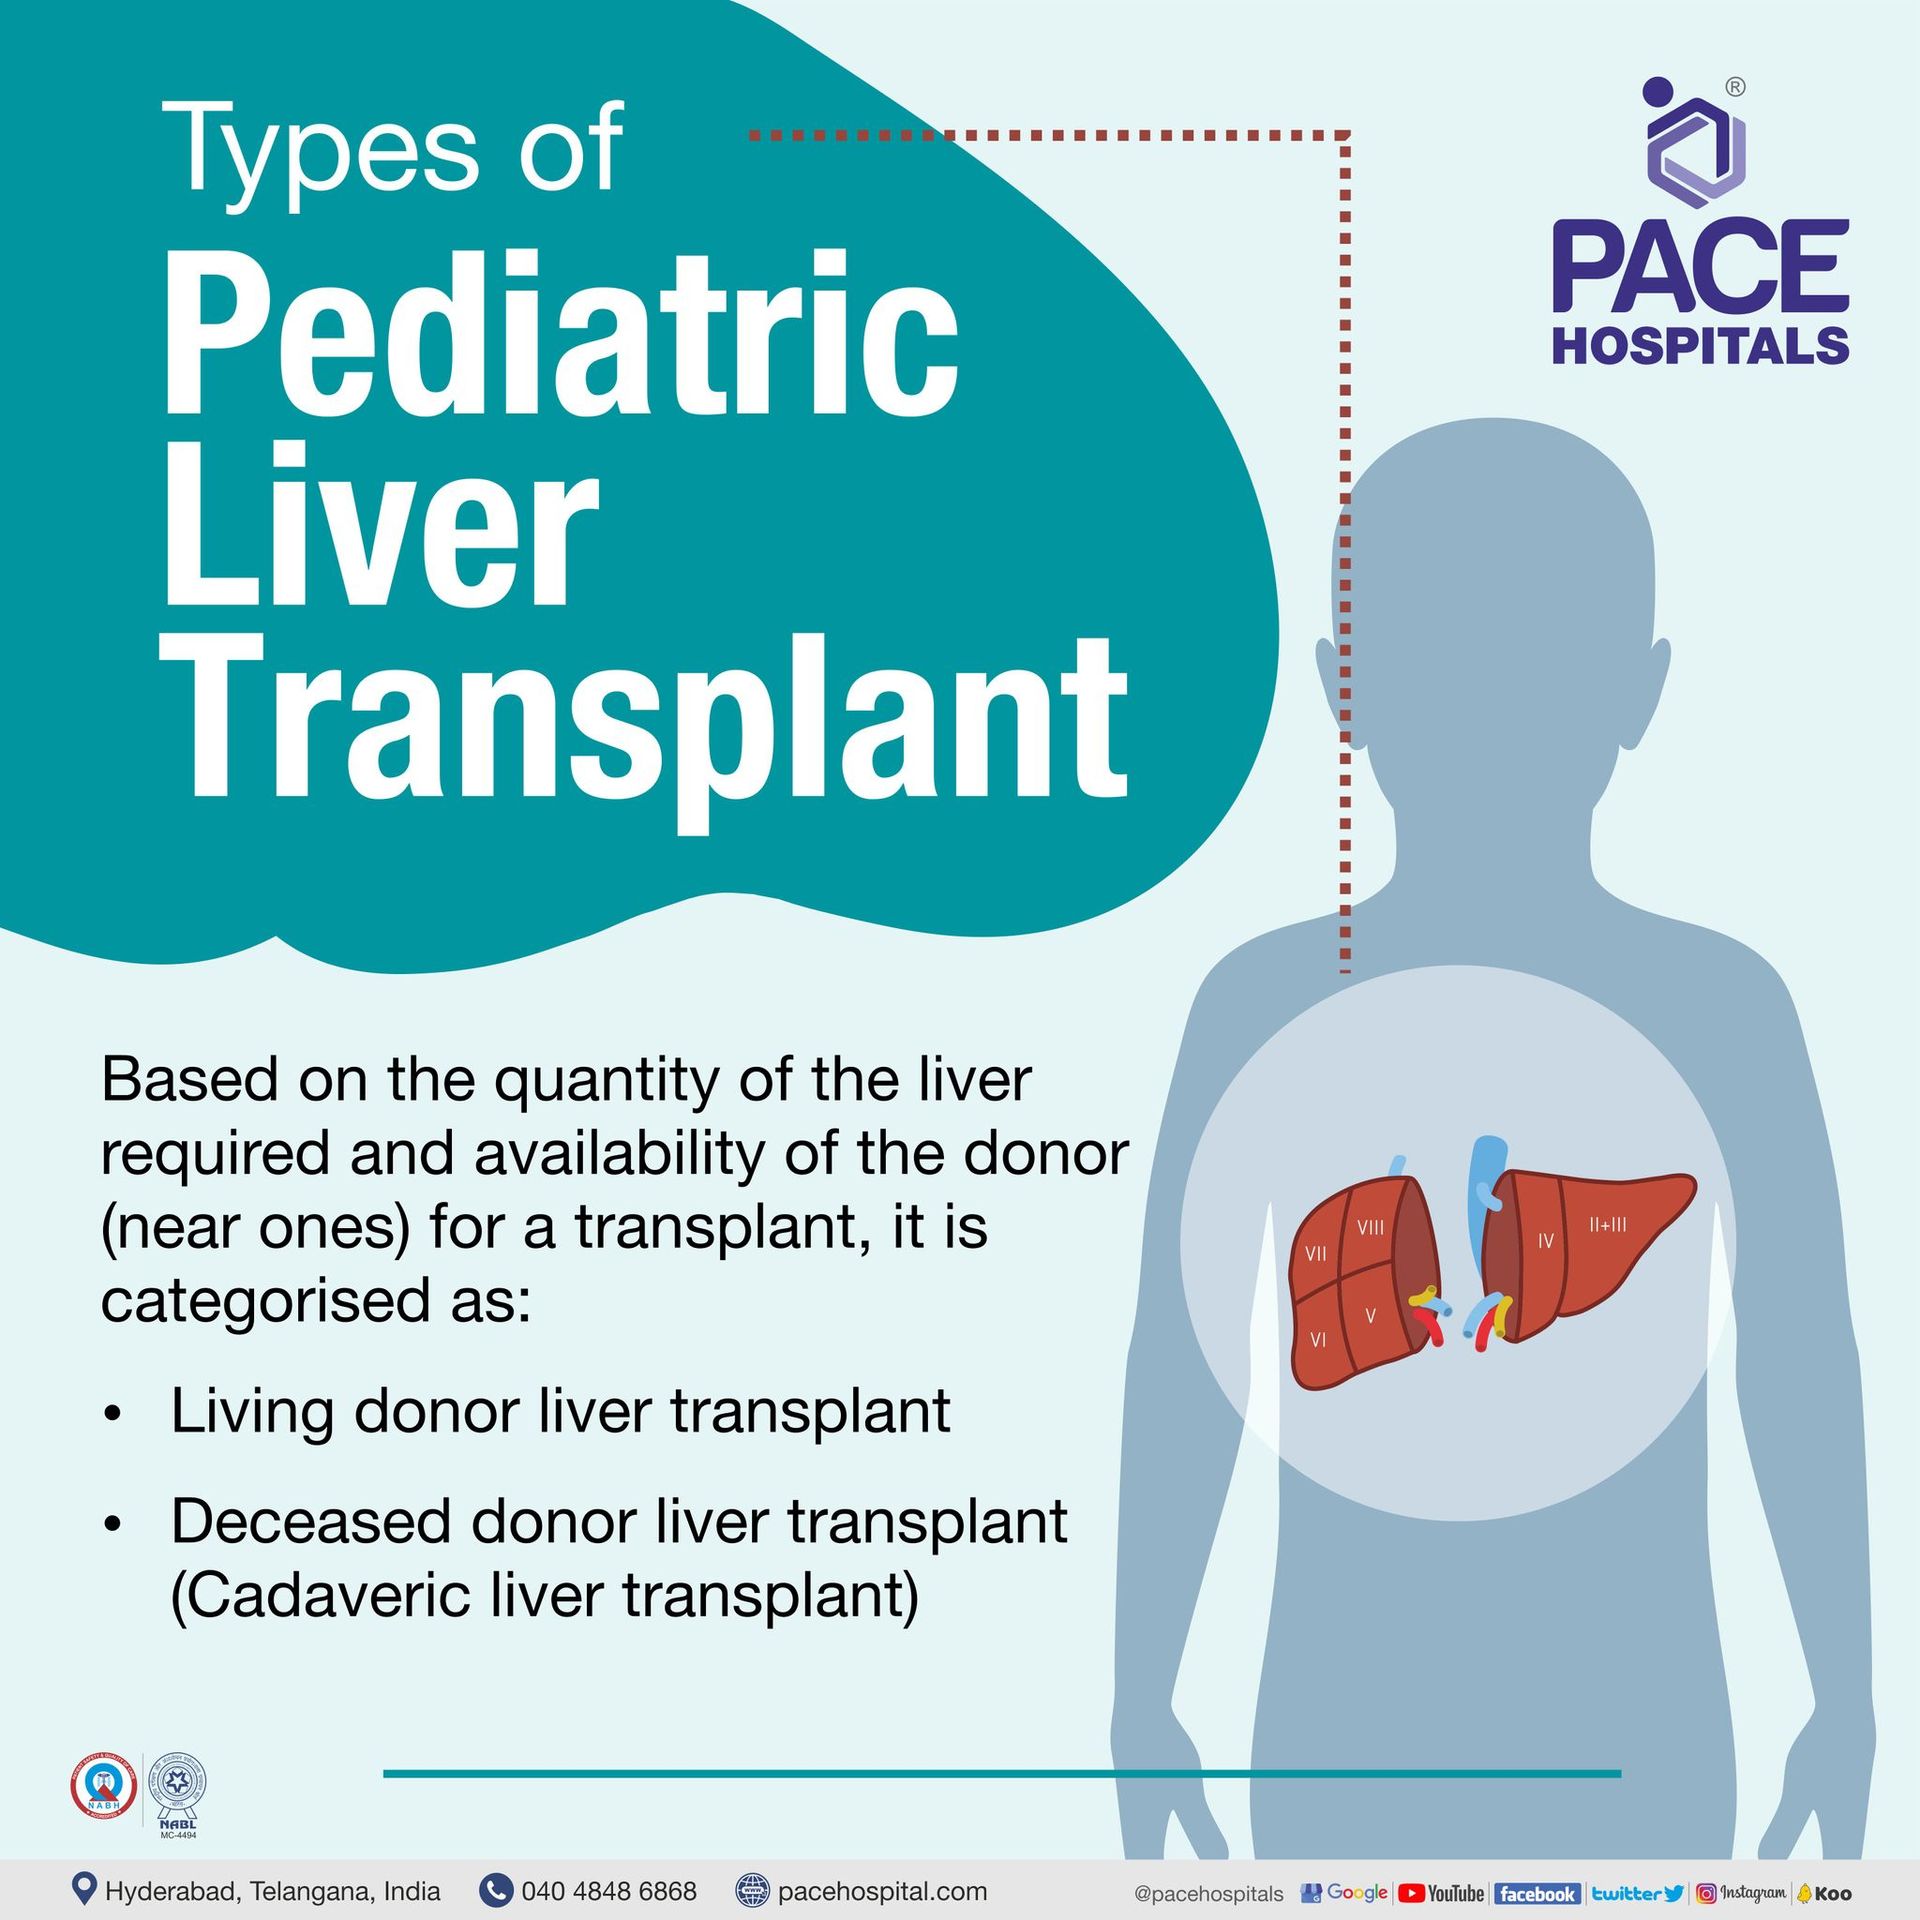 Types and Indications for pediatric liver transplant | healthy childrens liver and Biliary Atresia | Deceased Donor & Living Donor Pediatric Liver Transplantation